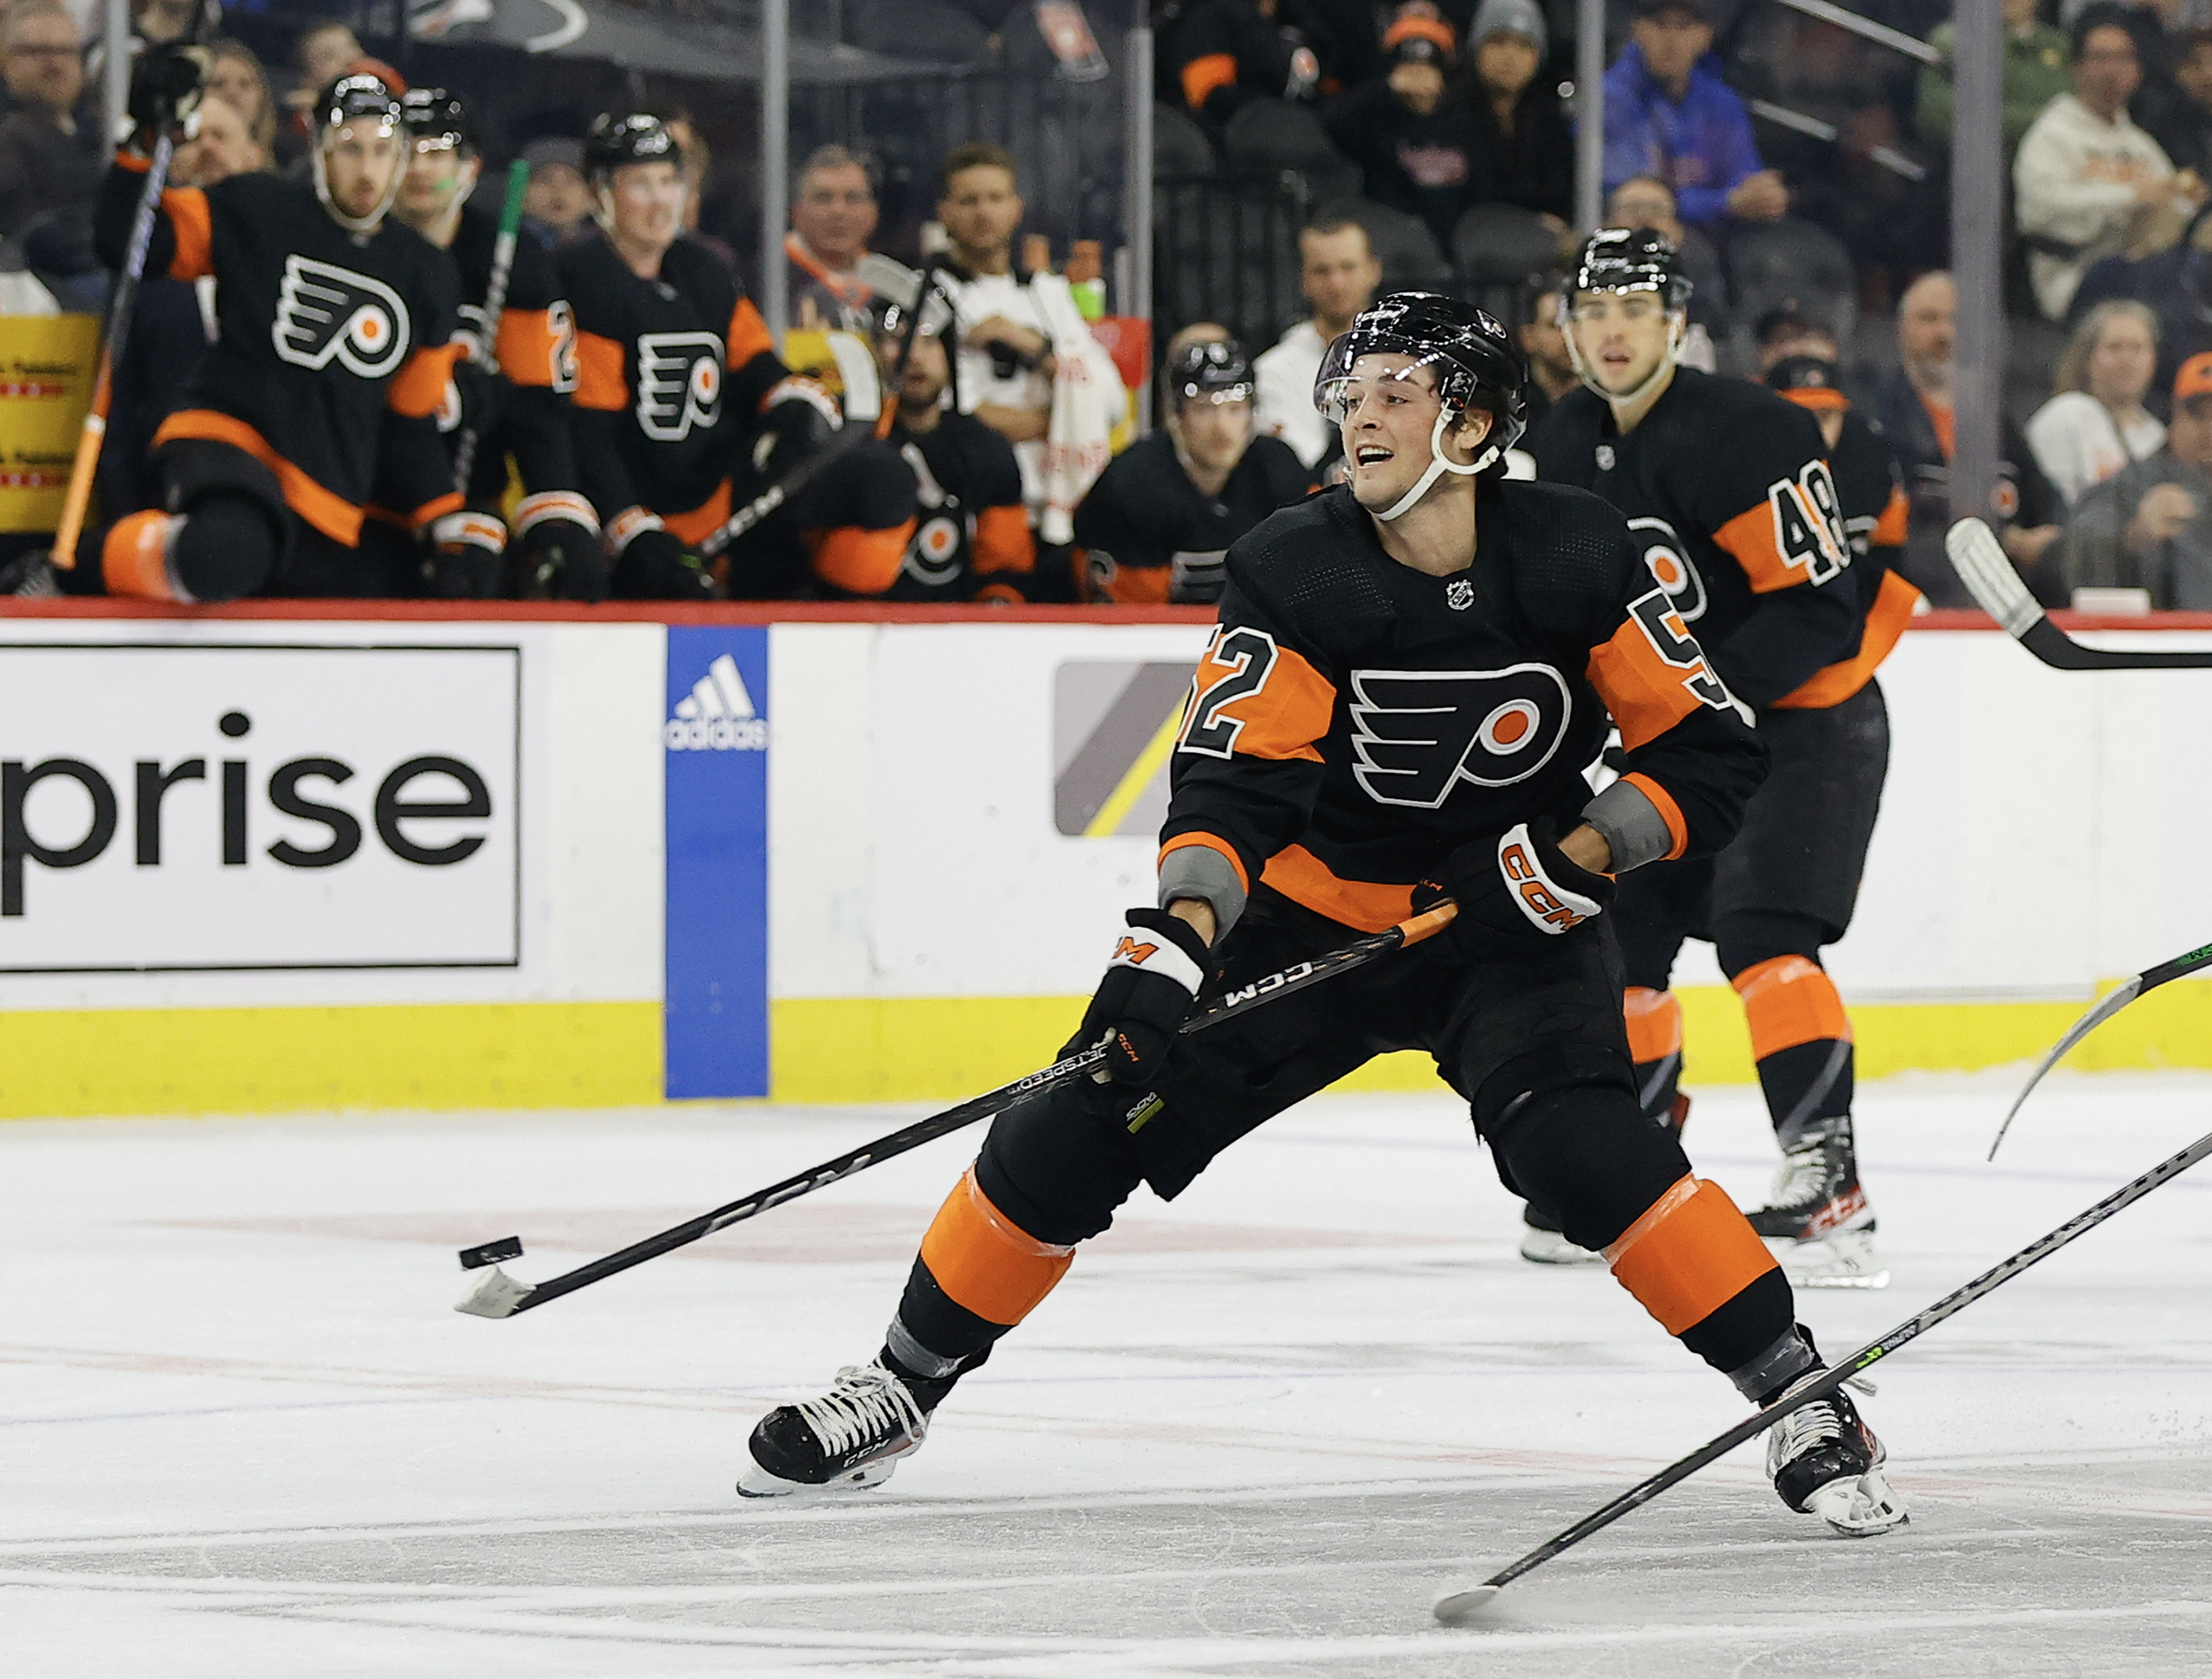 Flyers Rookie Series Roster Announced - Lehigh Valley Phantoms